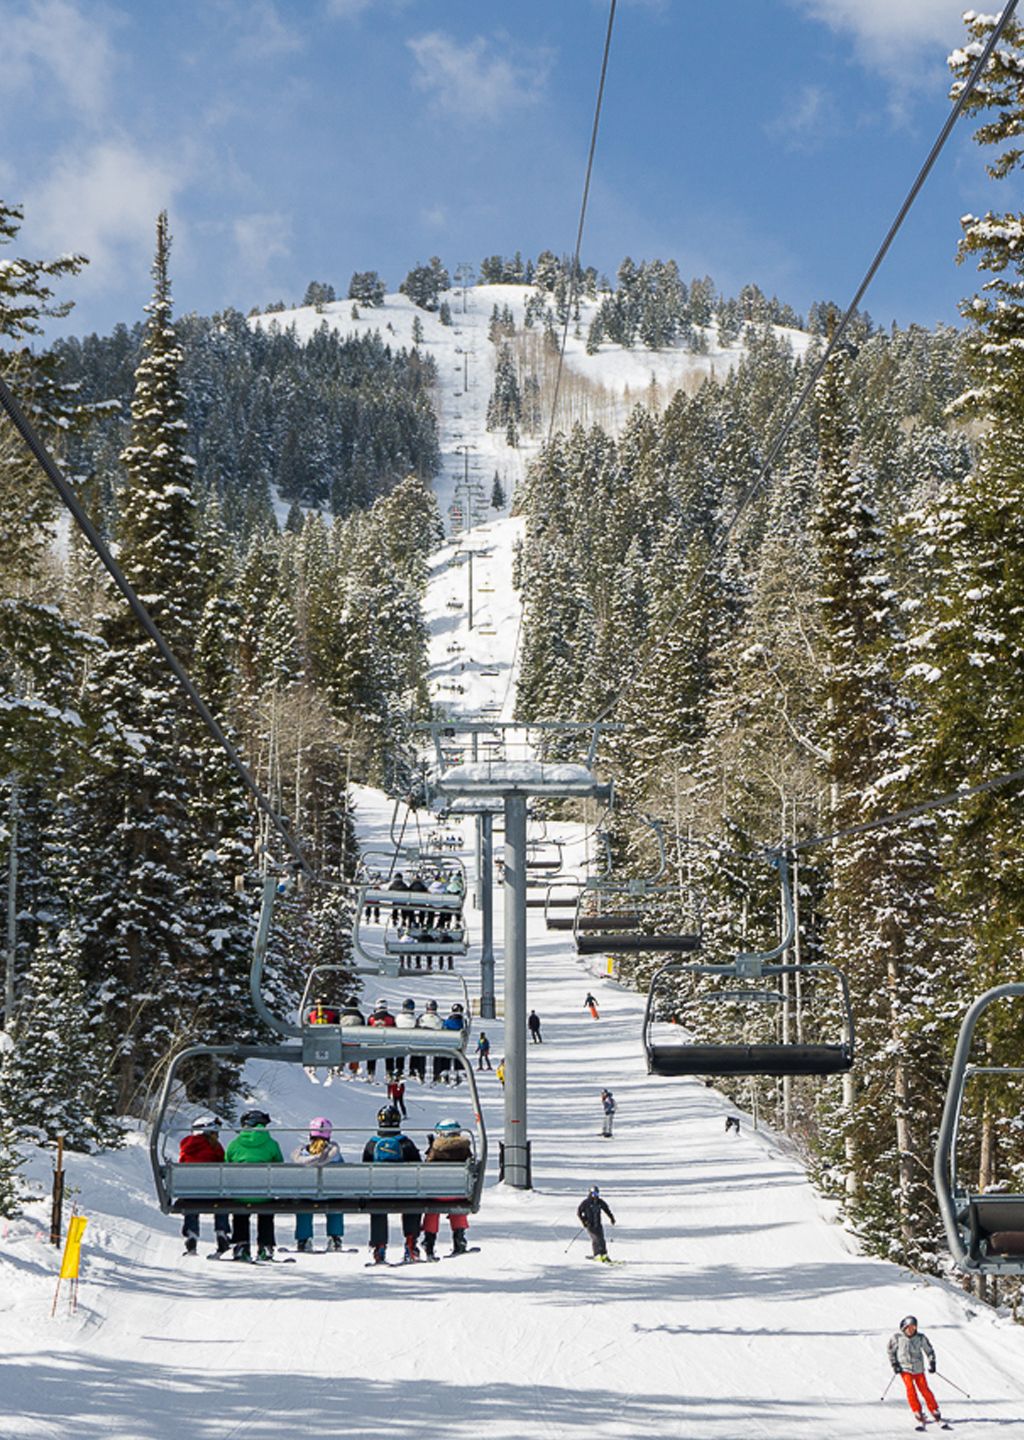 A Guide to Park City Resort Lift Tickets and Passes: 2022-23 Season